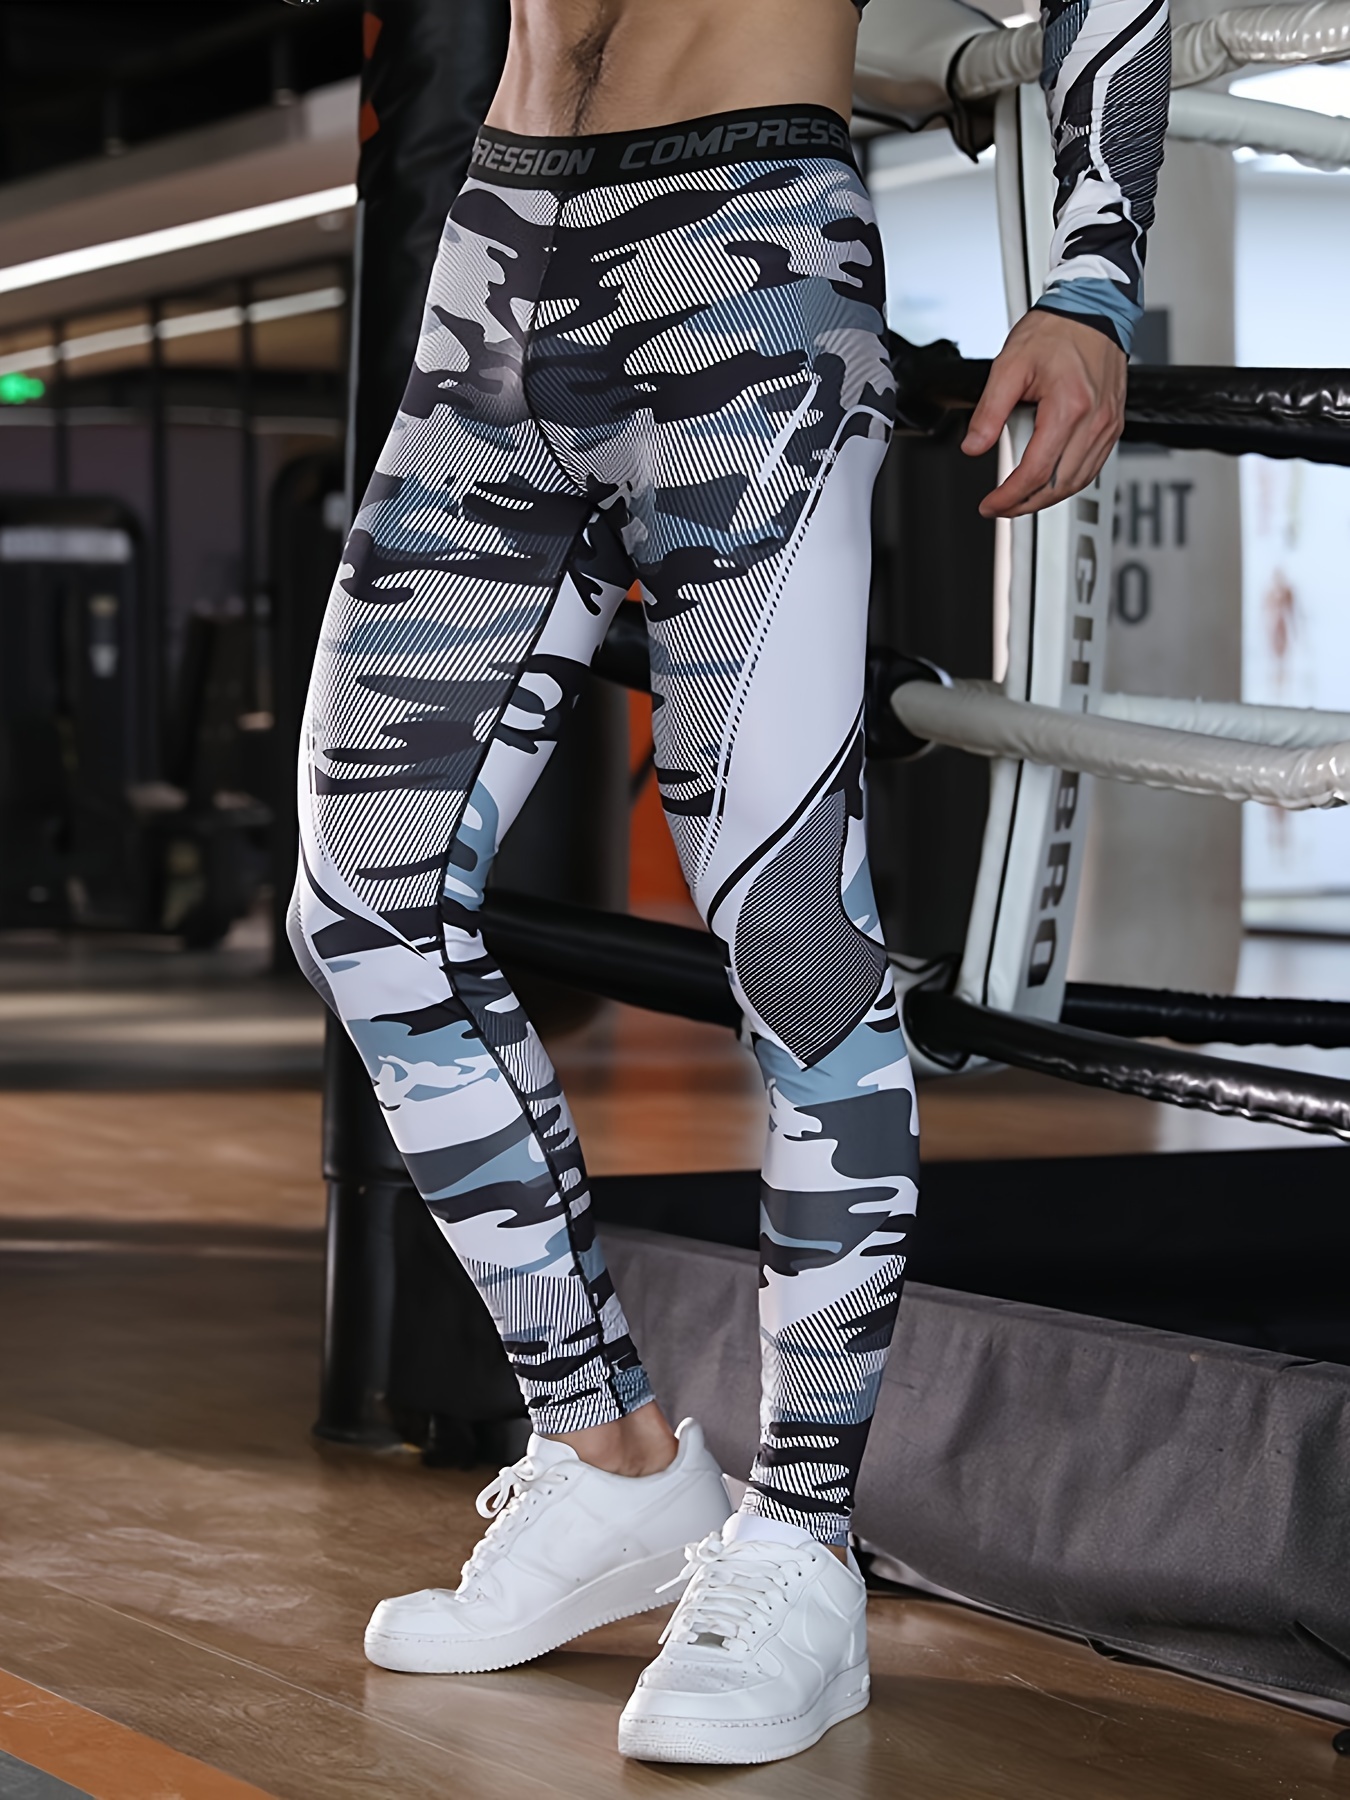 Women's Sweatpants With Buttons, Women's Sports Tight-fitting